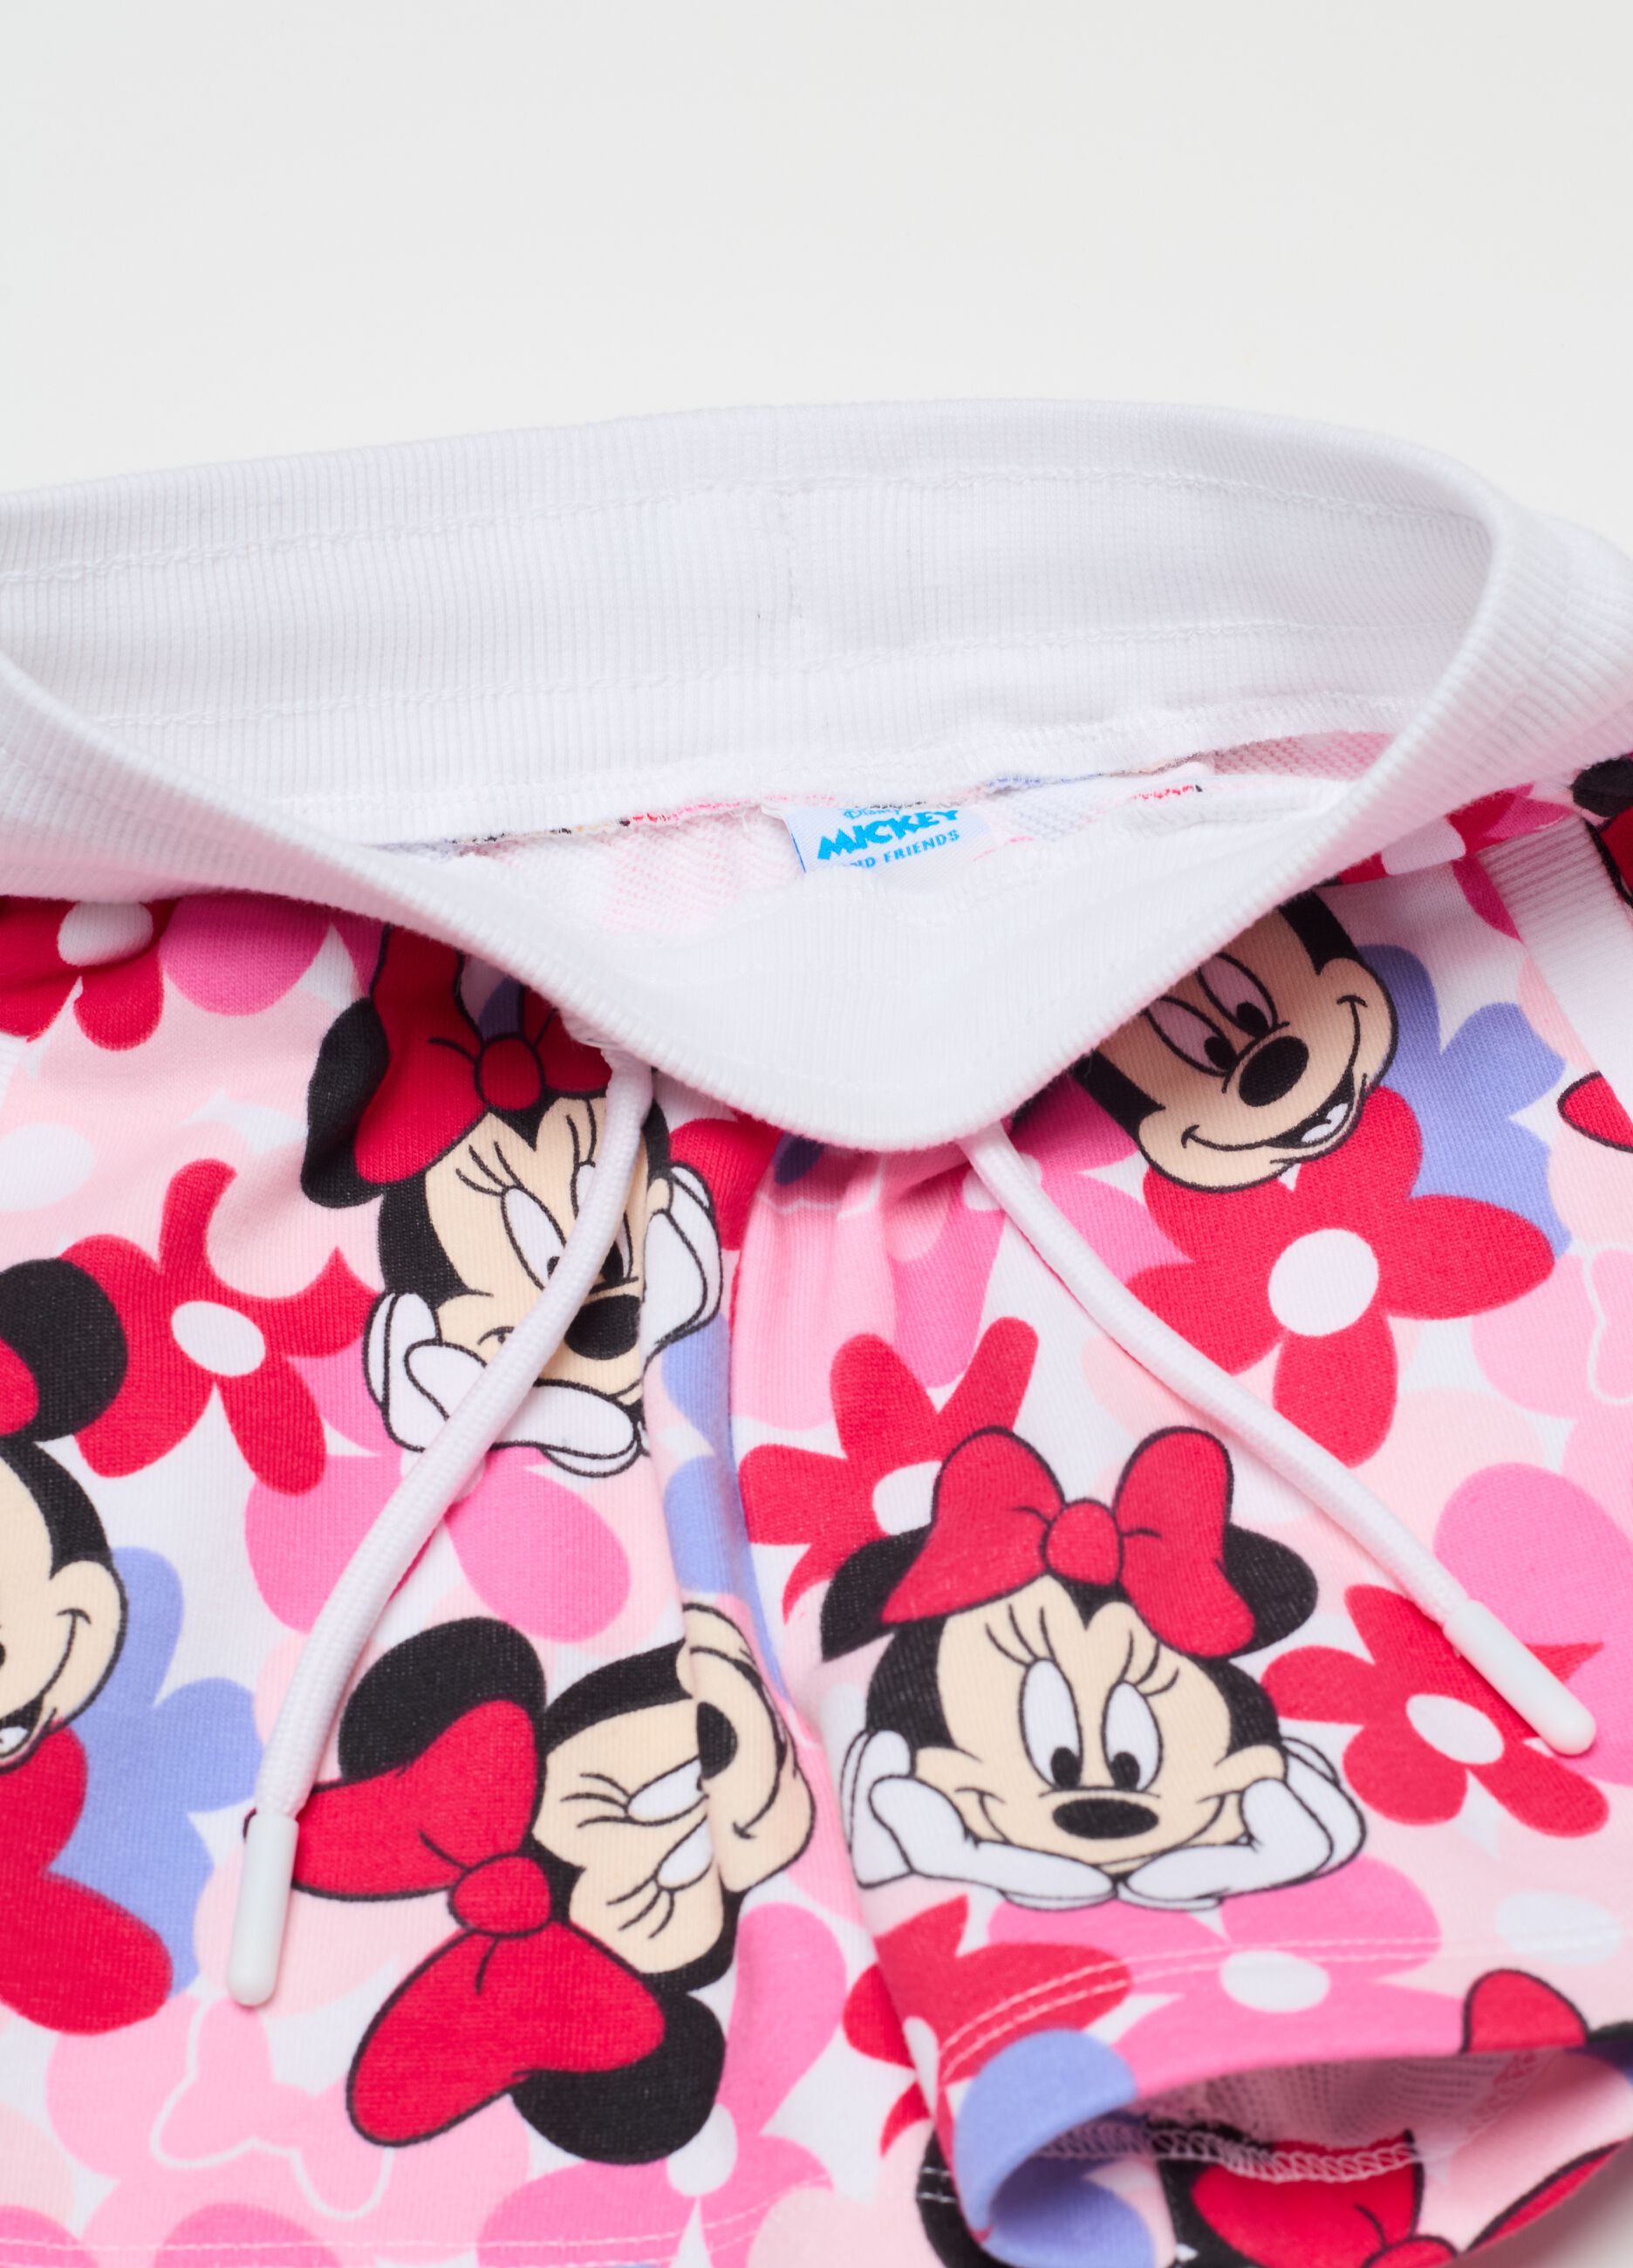 Shorts con coulisse e stampa Minnie